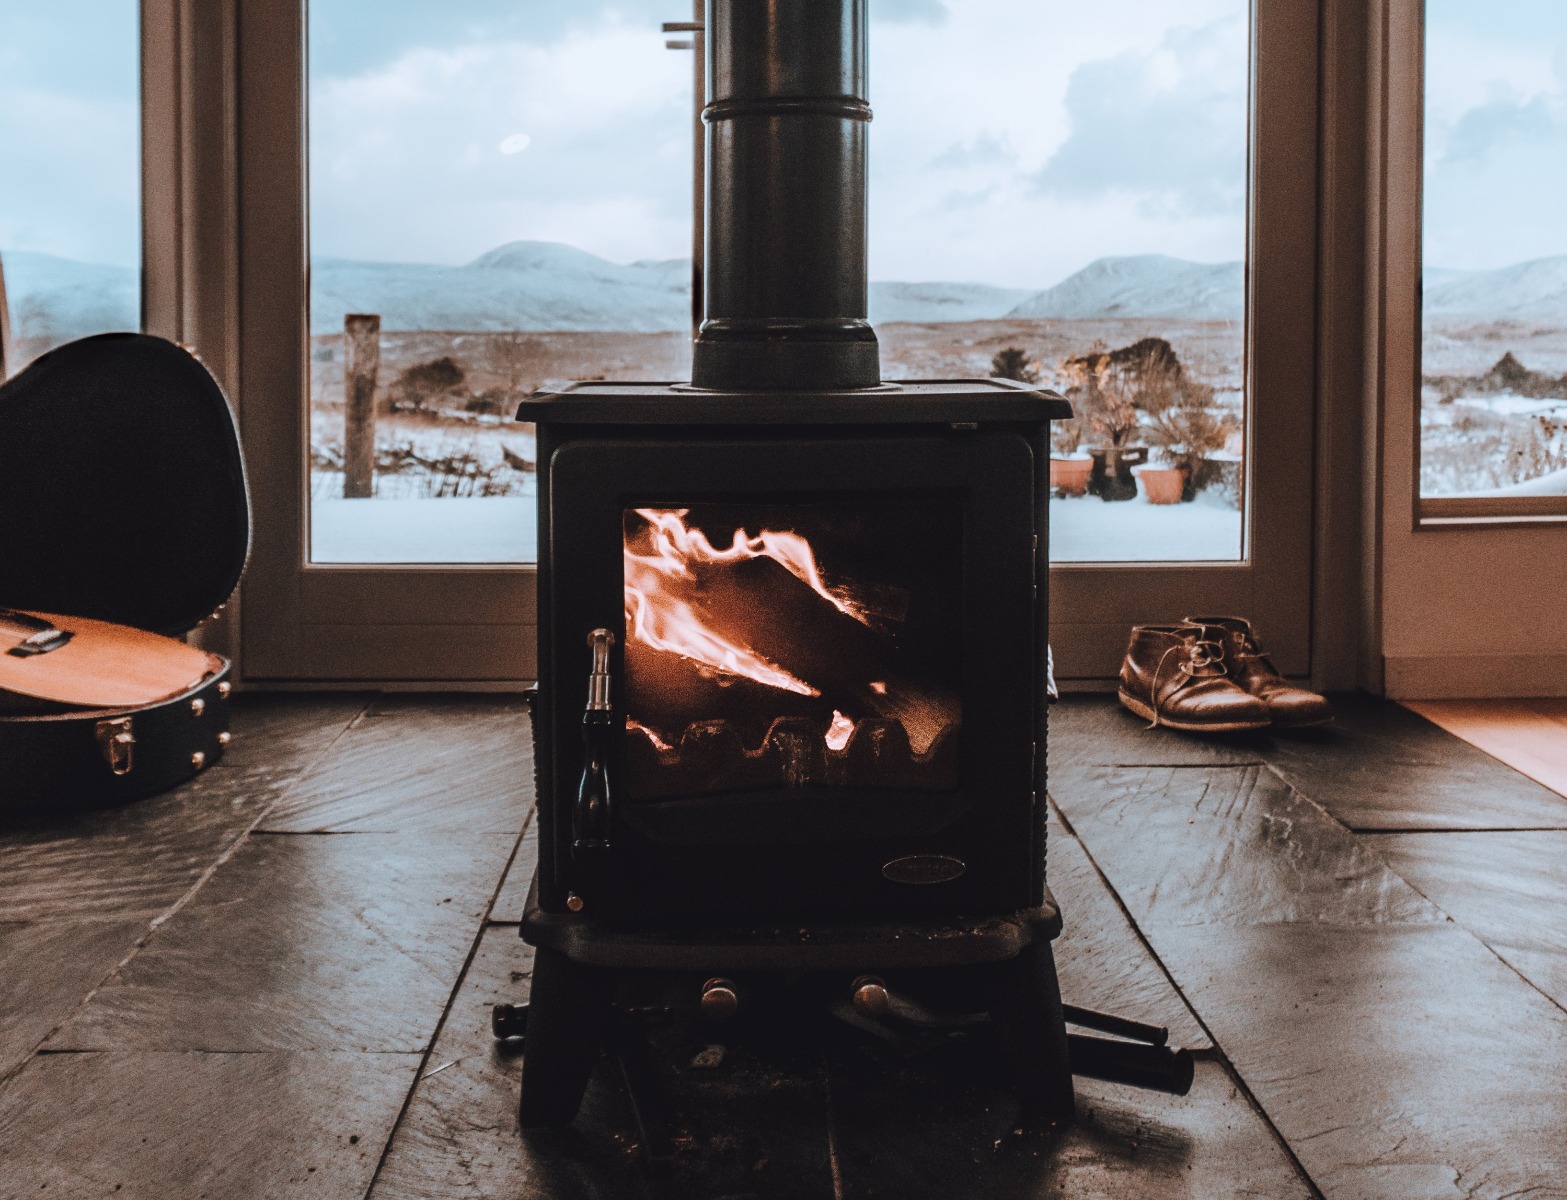 Log Burners are a stylish way to heat your cabin through the winter